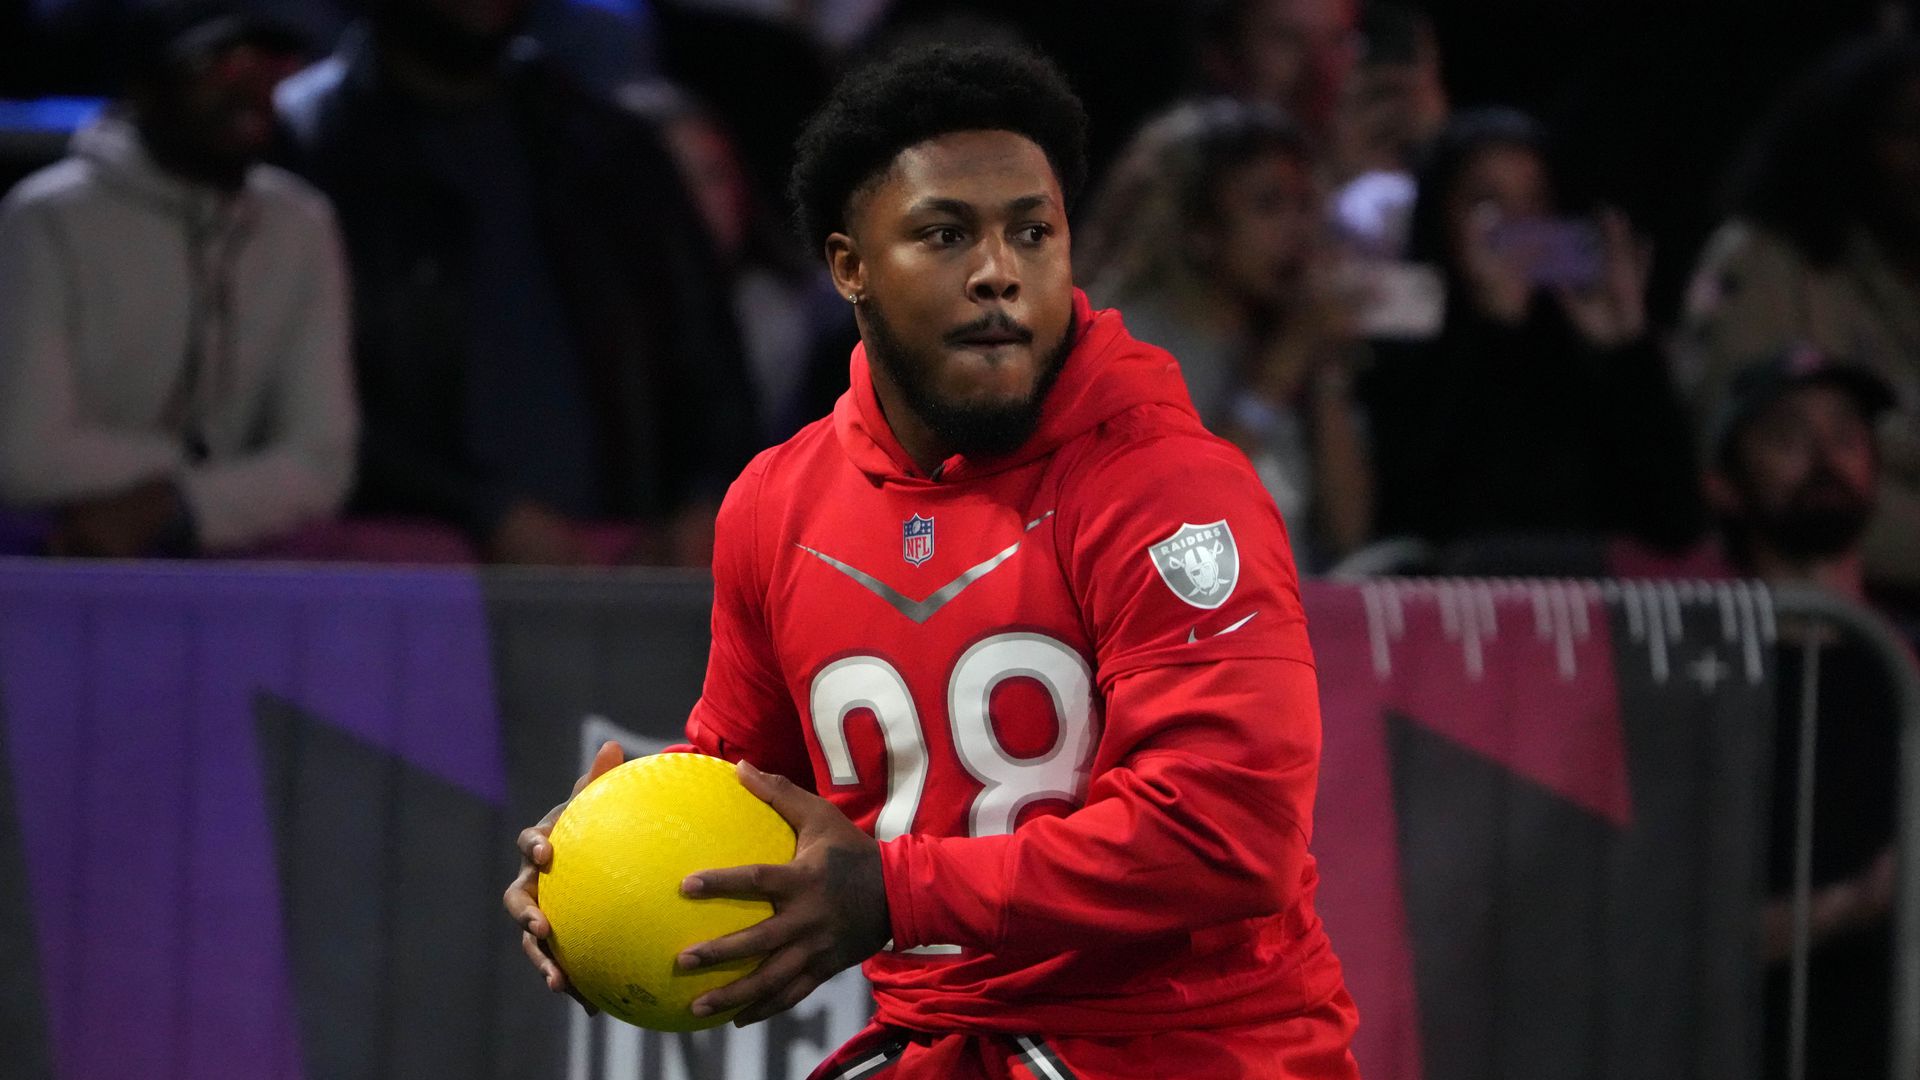 NFL: Pro Bowl Skills Competition